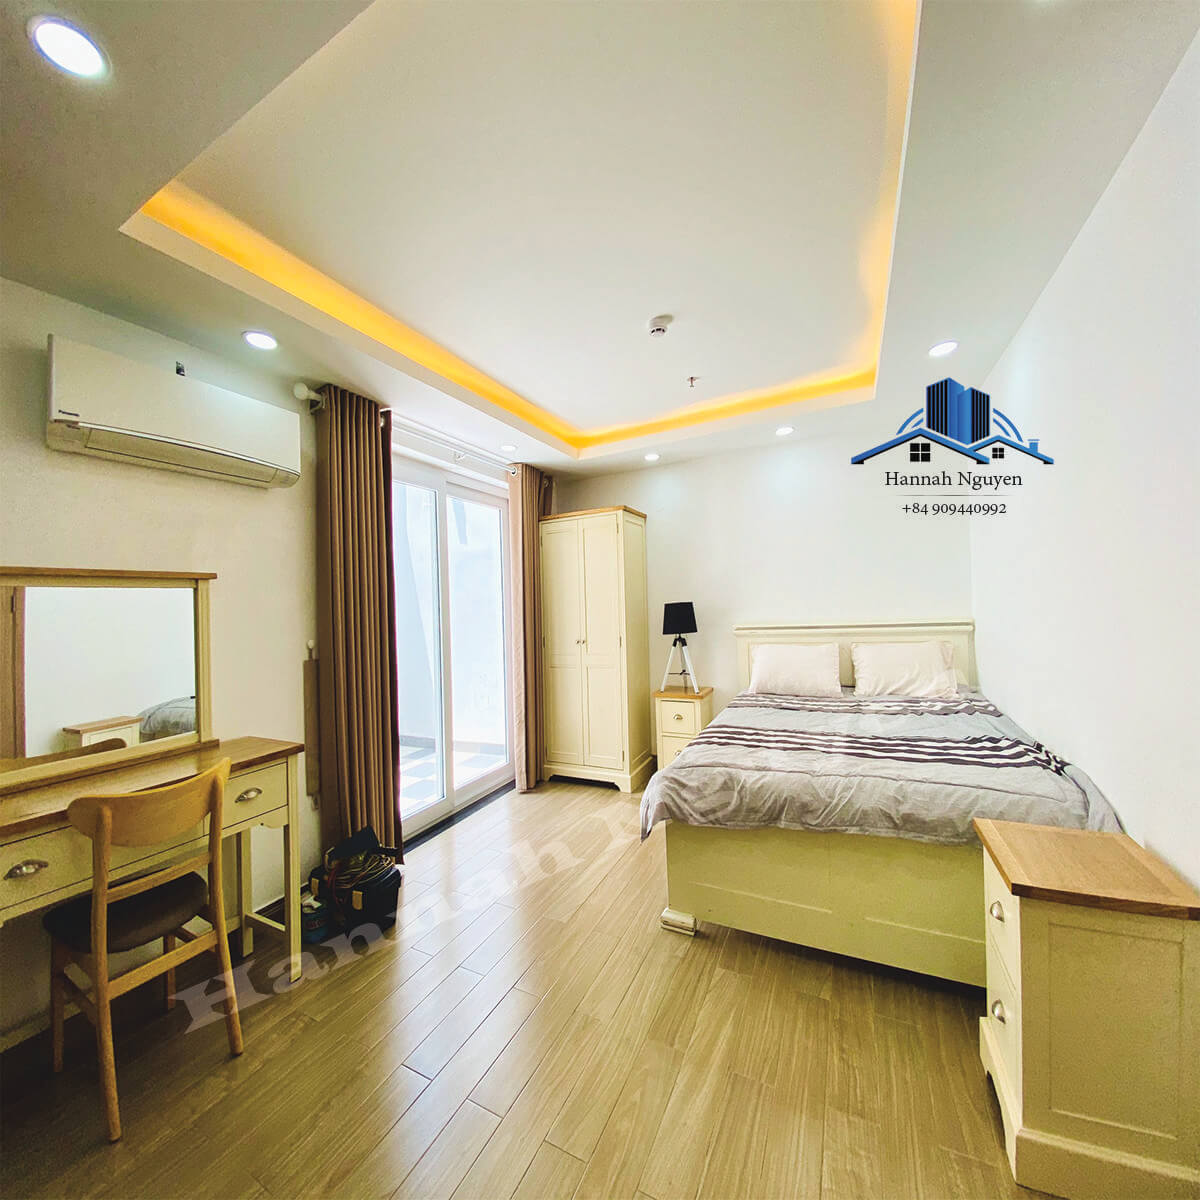 Private Yard, Nice Studio Serviced Apartment For Rent near Xuan Thuy street, Thao Dien, D2